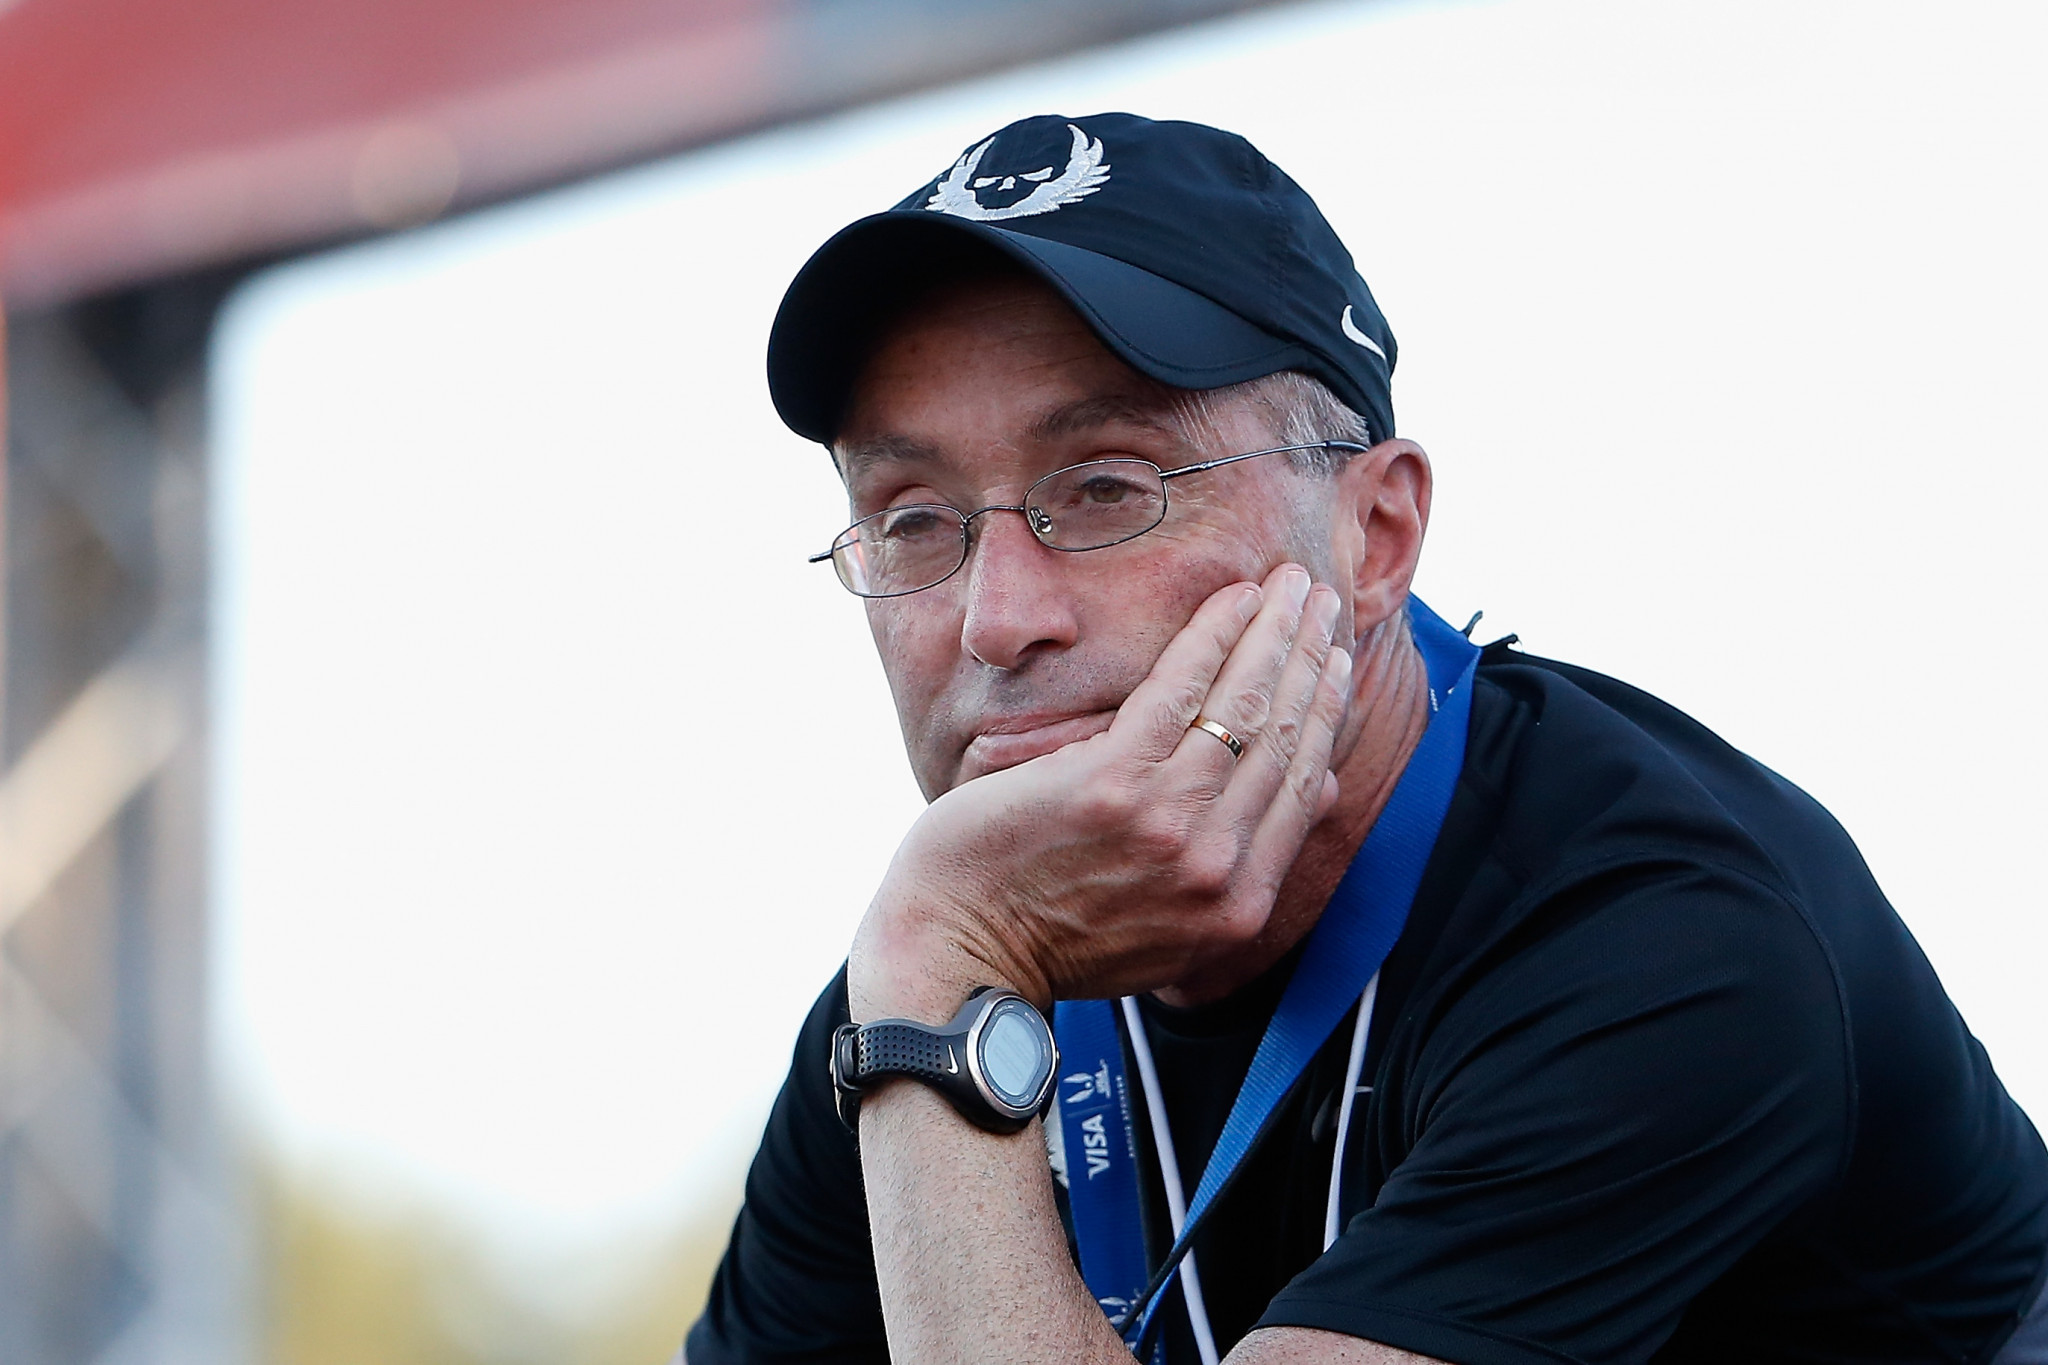 Exclusive: Salazar athletes in Doha told to stay away from US coach after four-year doping ban